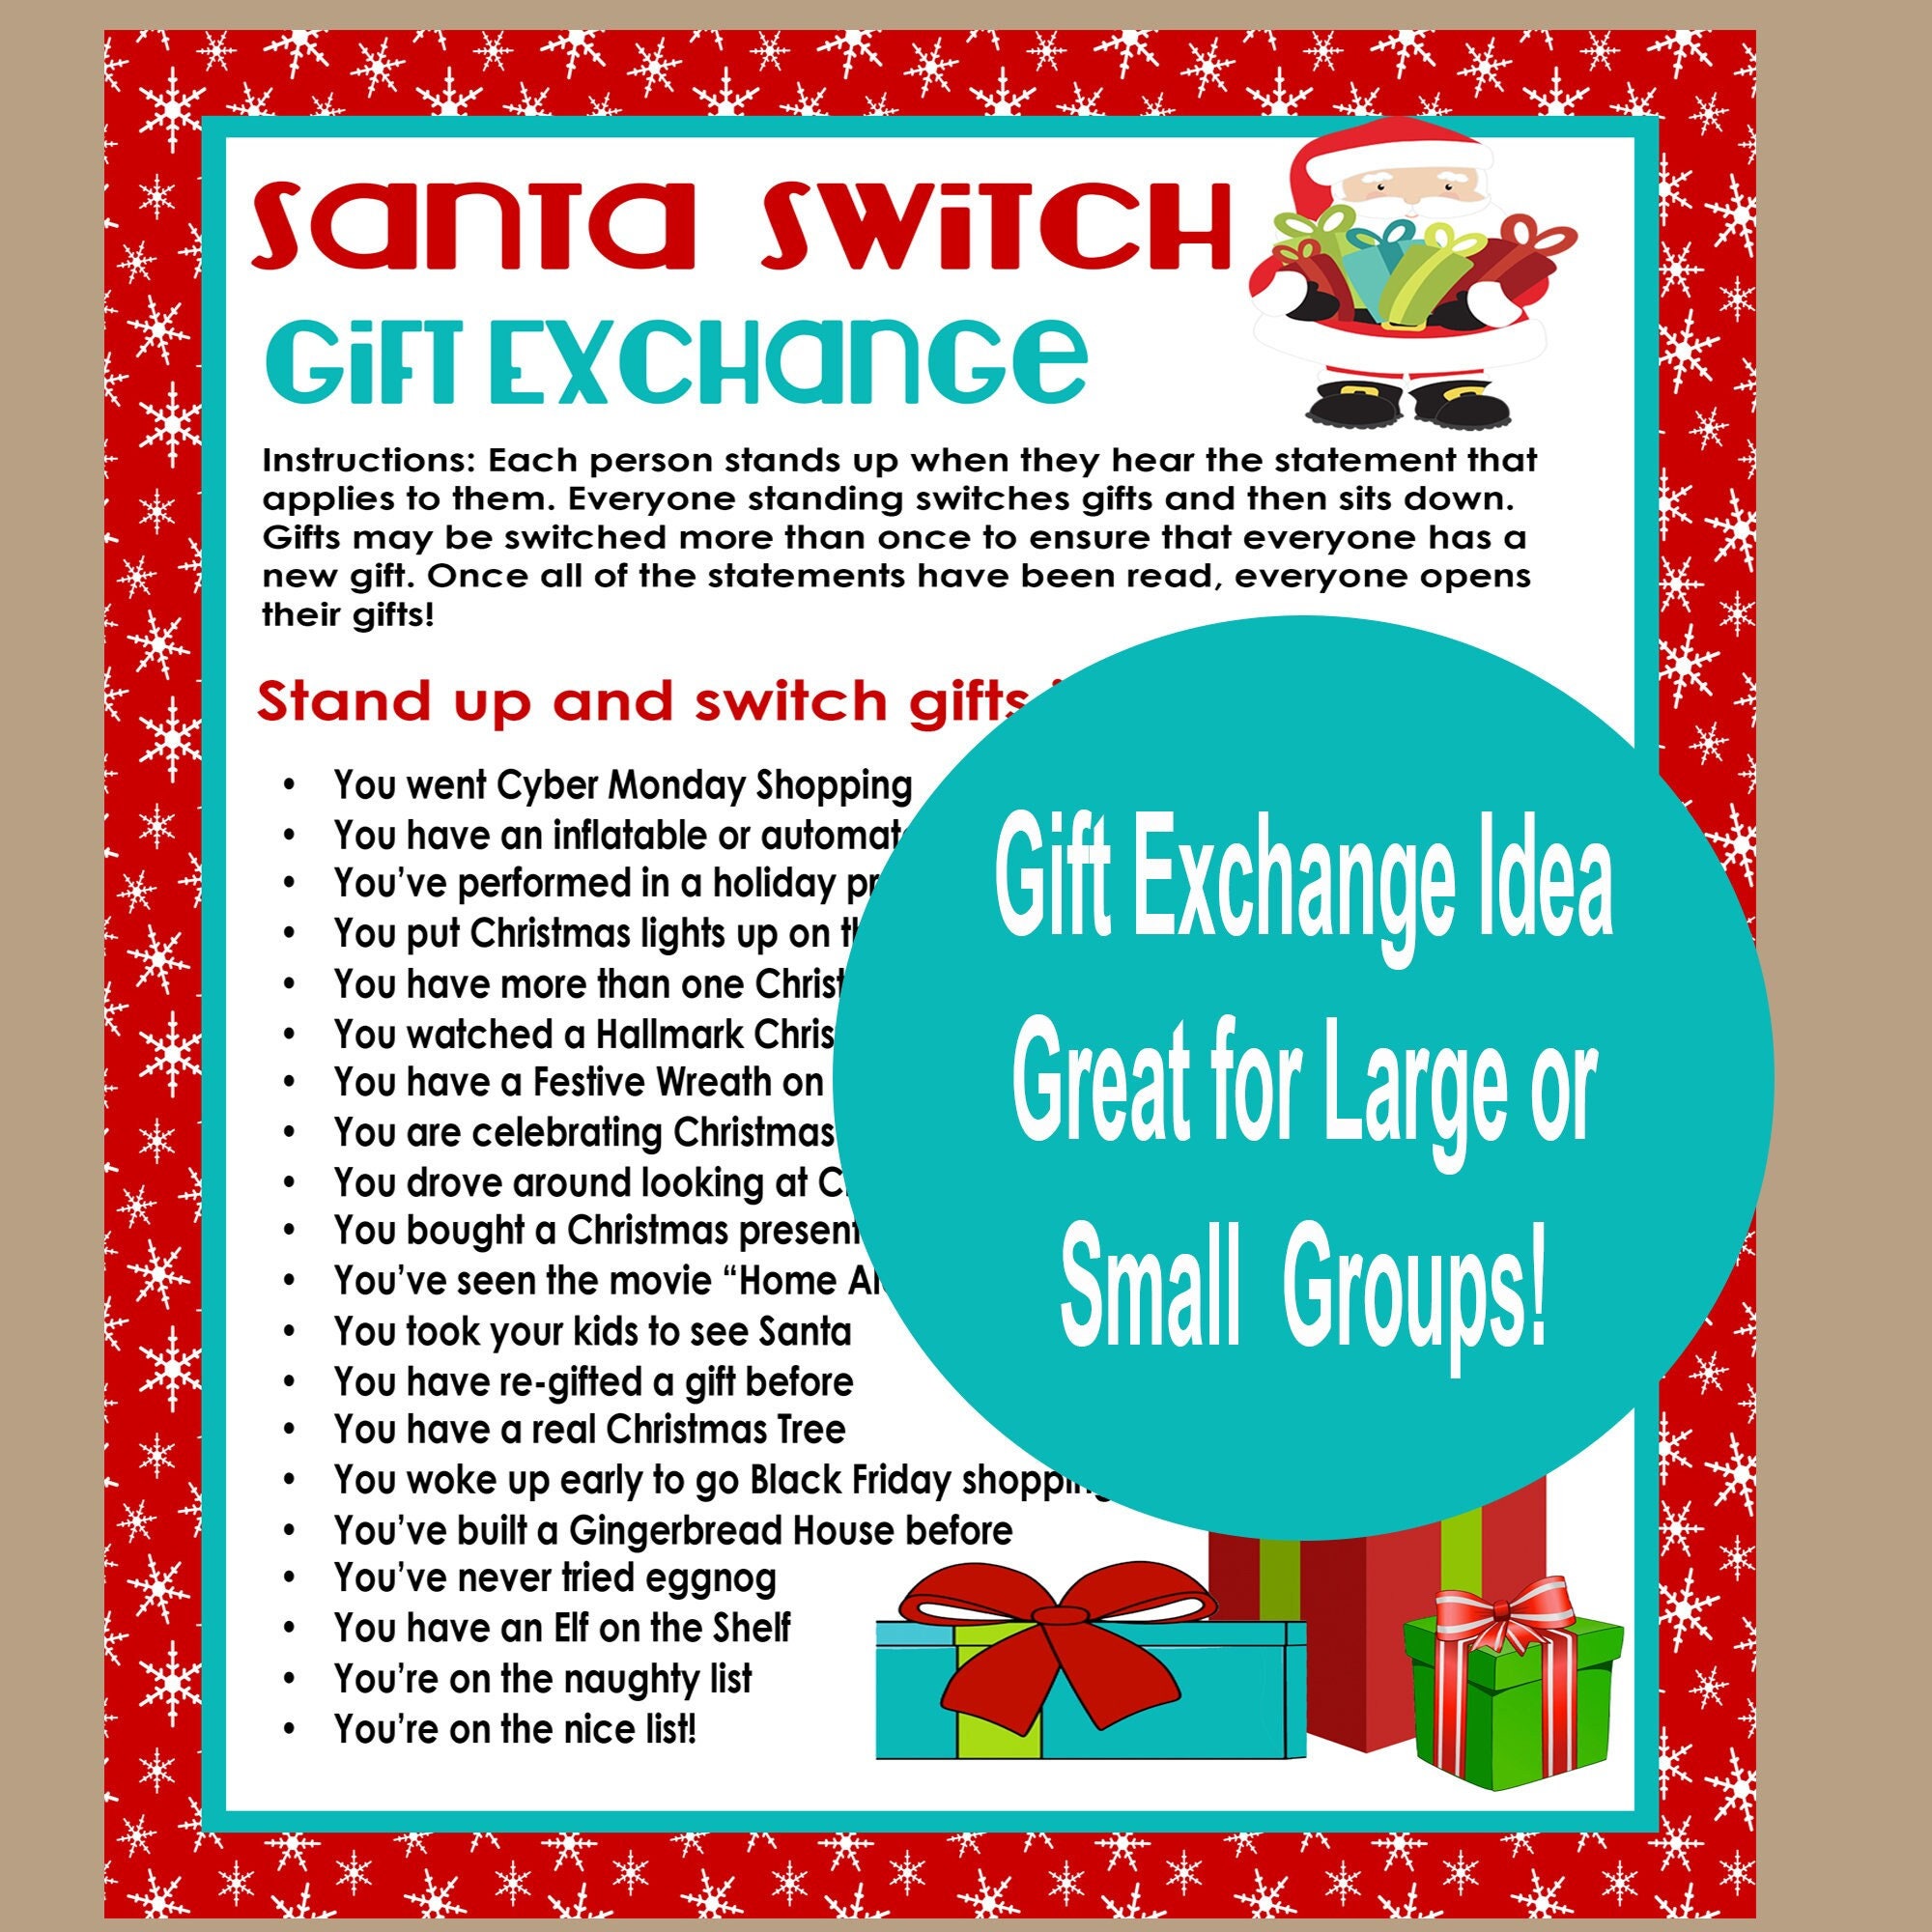 Themed Gift Exchange Ideas for a Personalized Party Experience